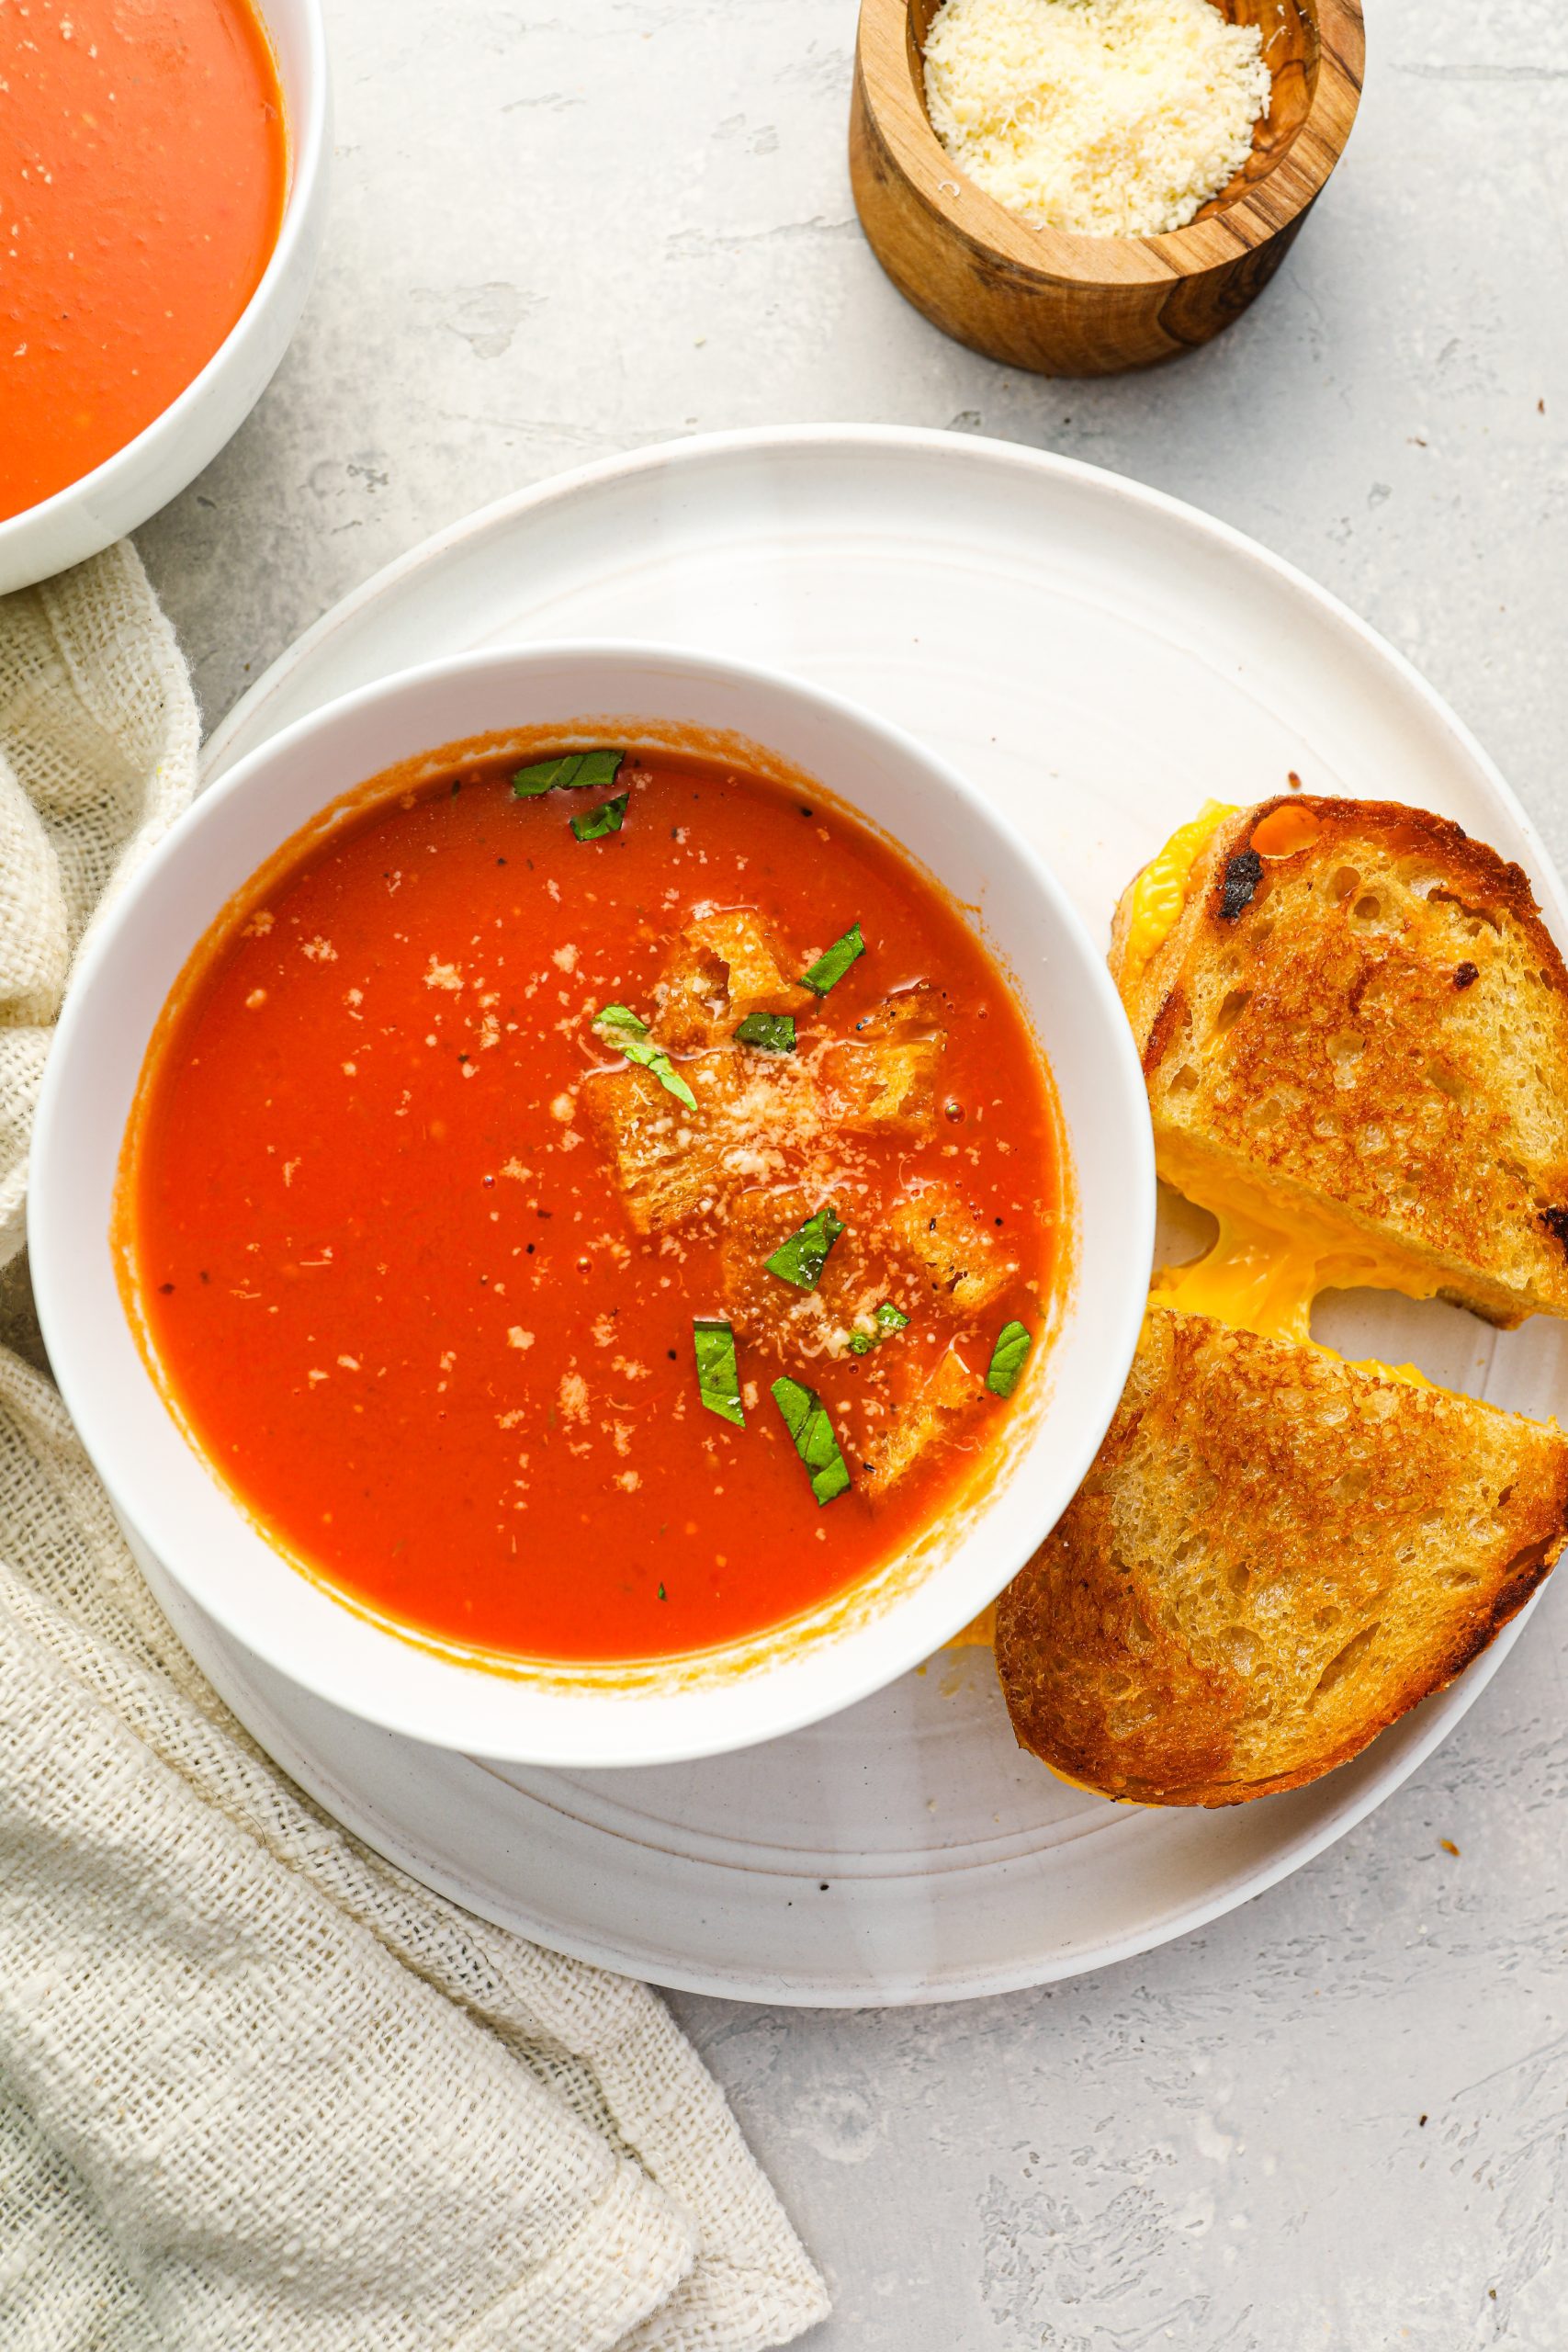 https://www.onceuponachef.com/images/2021/02/Tomato-Soup-3-scaled.jpg